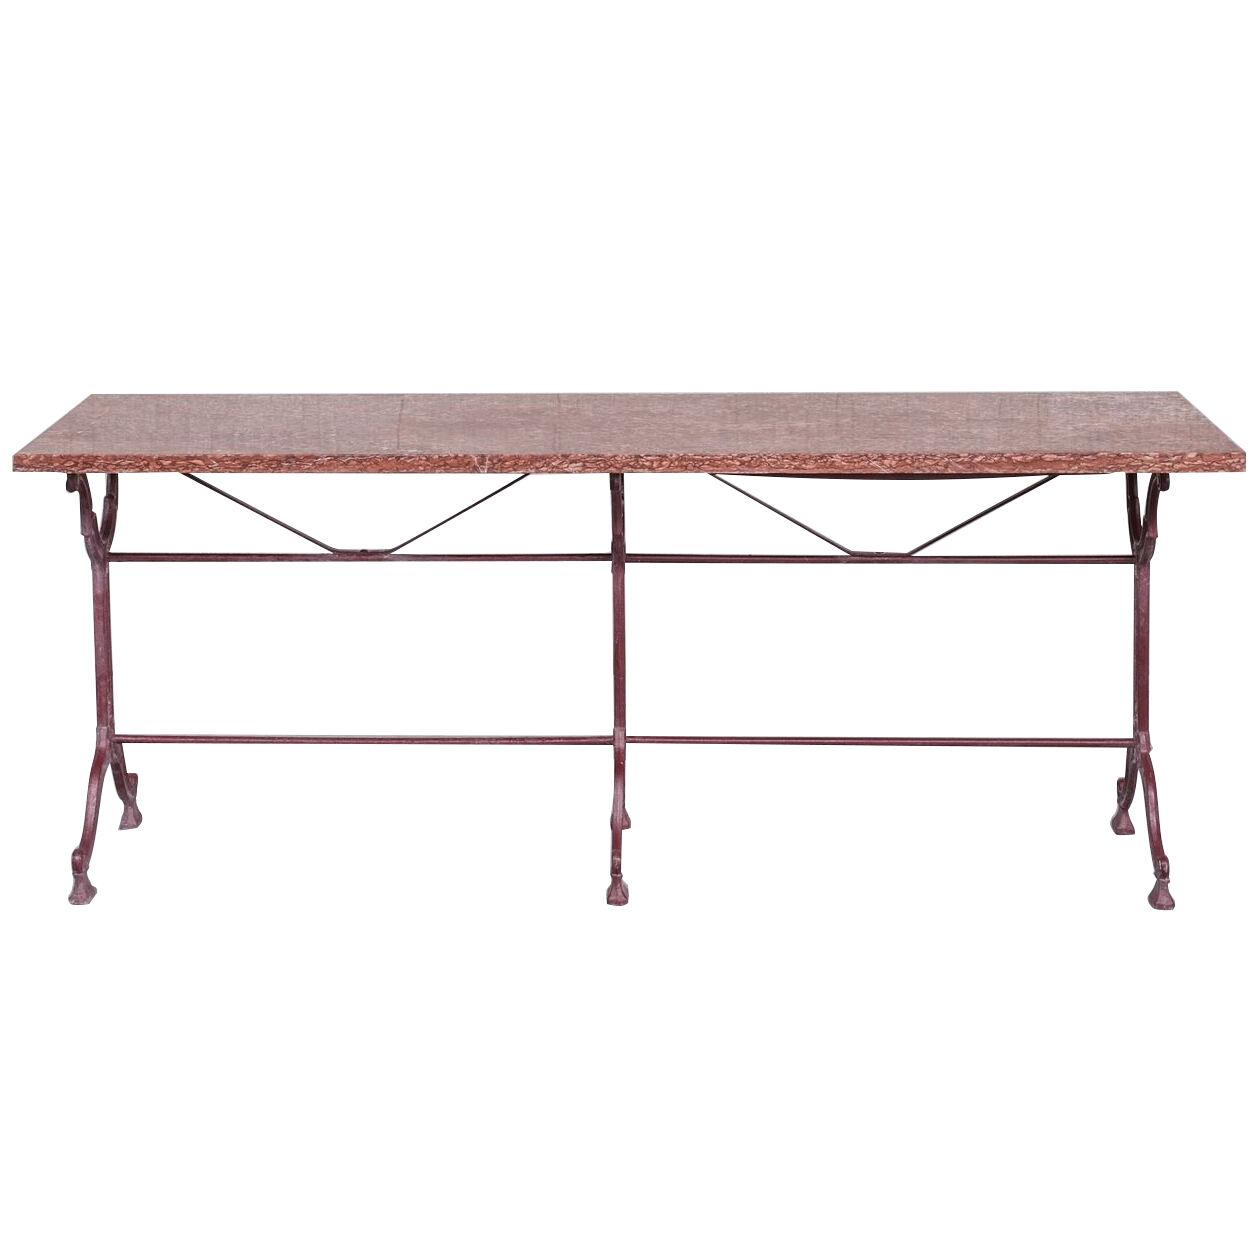 Red Marble and Painted Iron Mid-Century French Garden Table